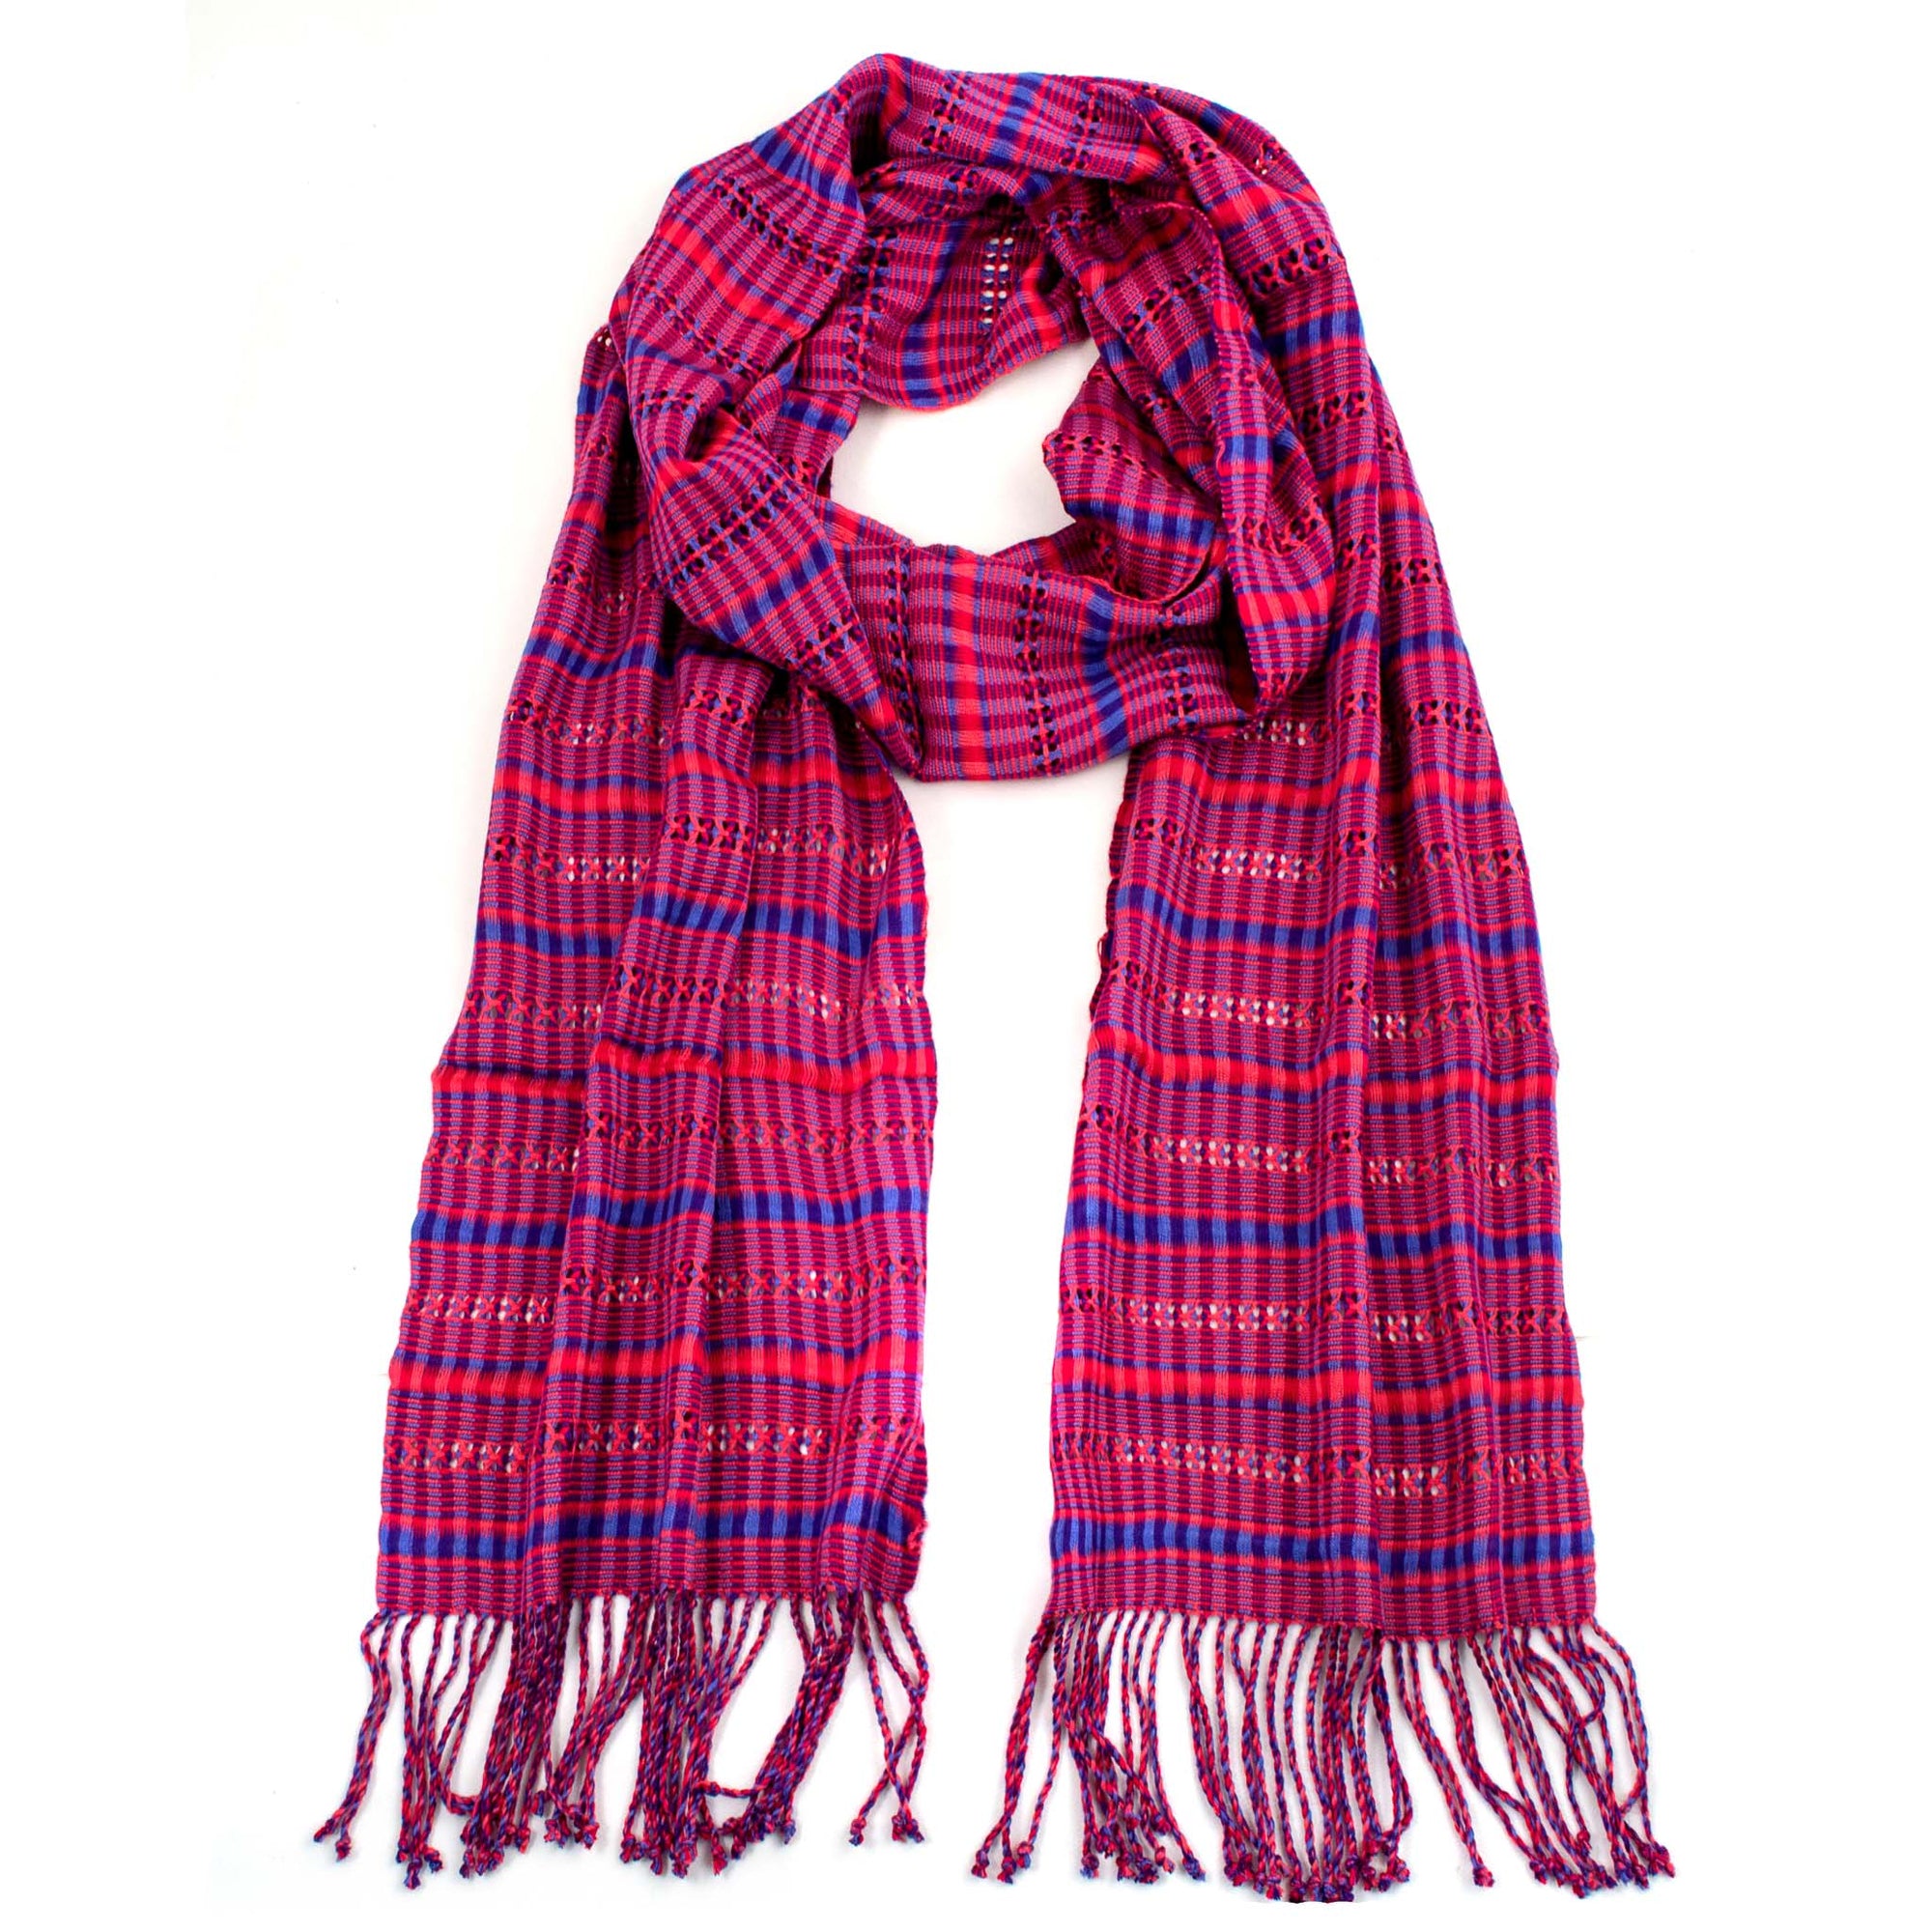 Annabelle Scarf in Fuchsia, made from rayon threads in pinks and blue, with twisted fringe. The scarf is laid flat, wrapped with a circle on white background.